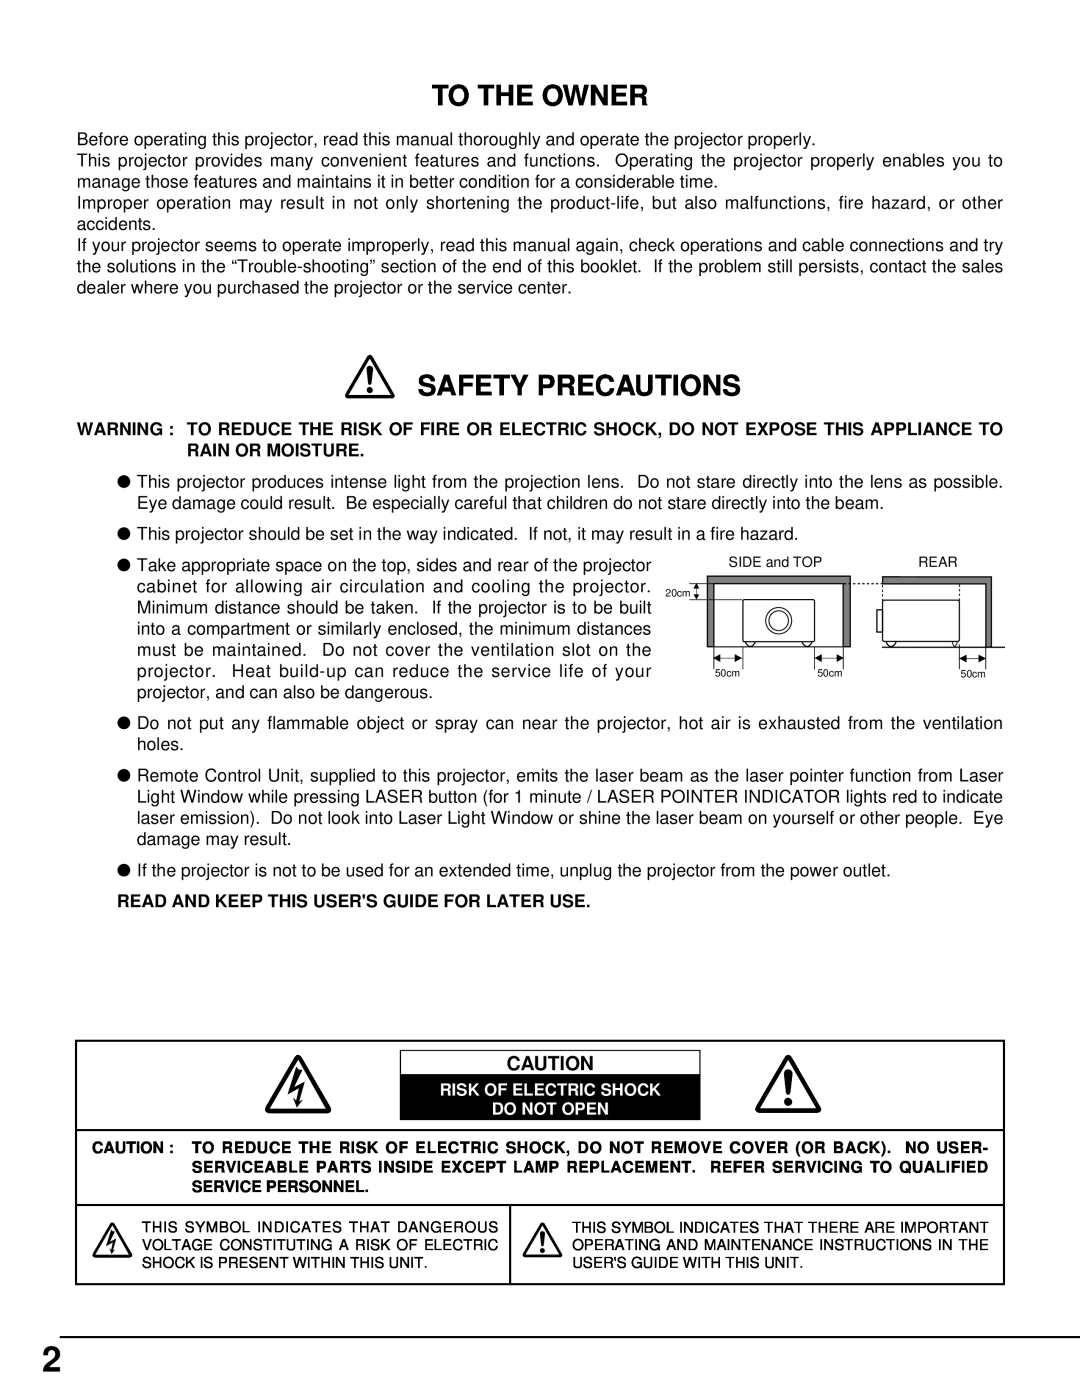 BOXLIGHT MP-42T manual To The Owner, Safety Precautions, Read And Keep This Users Guide For Later Use 